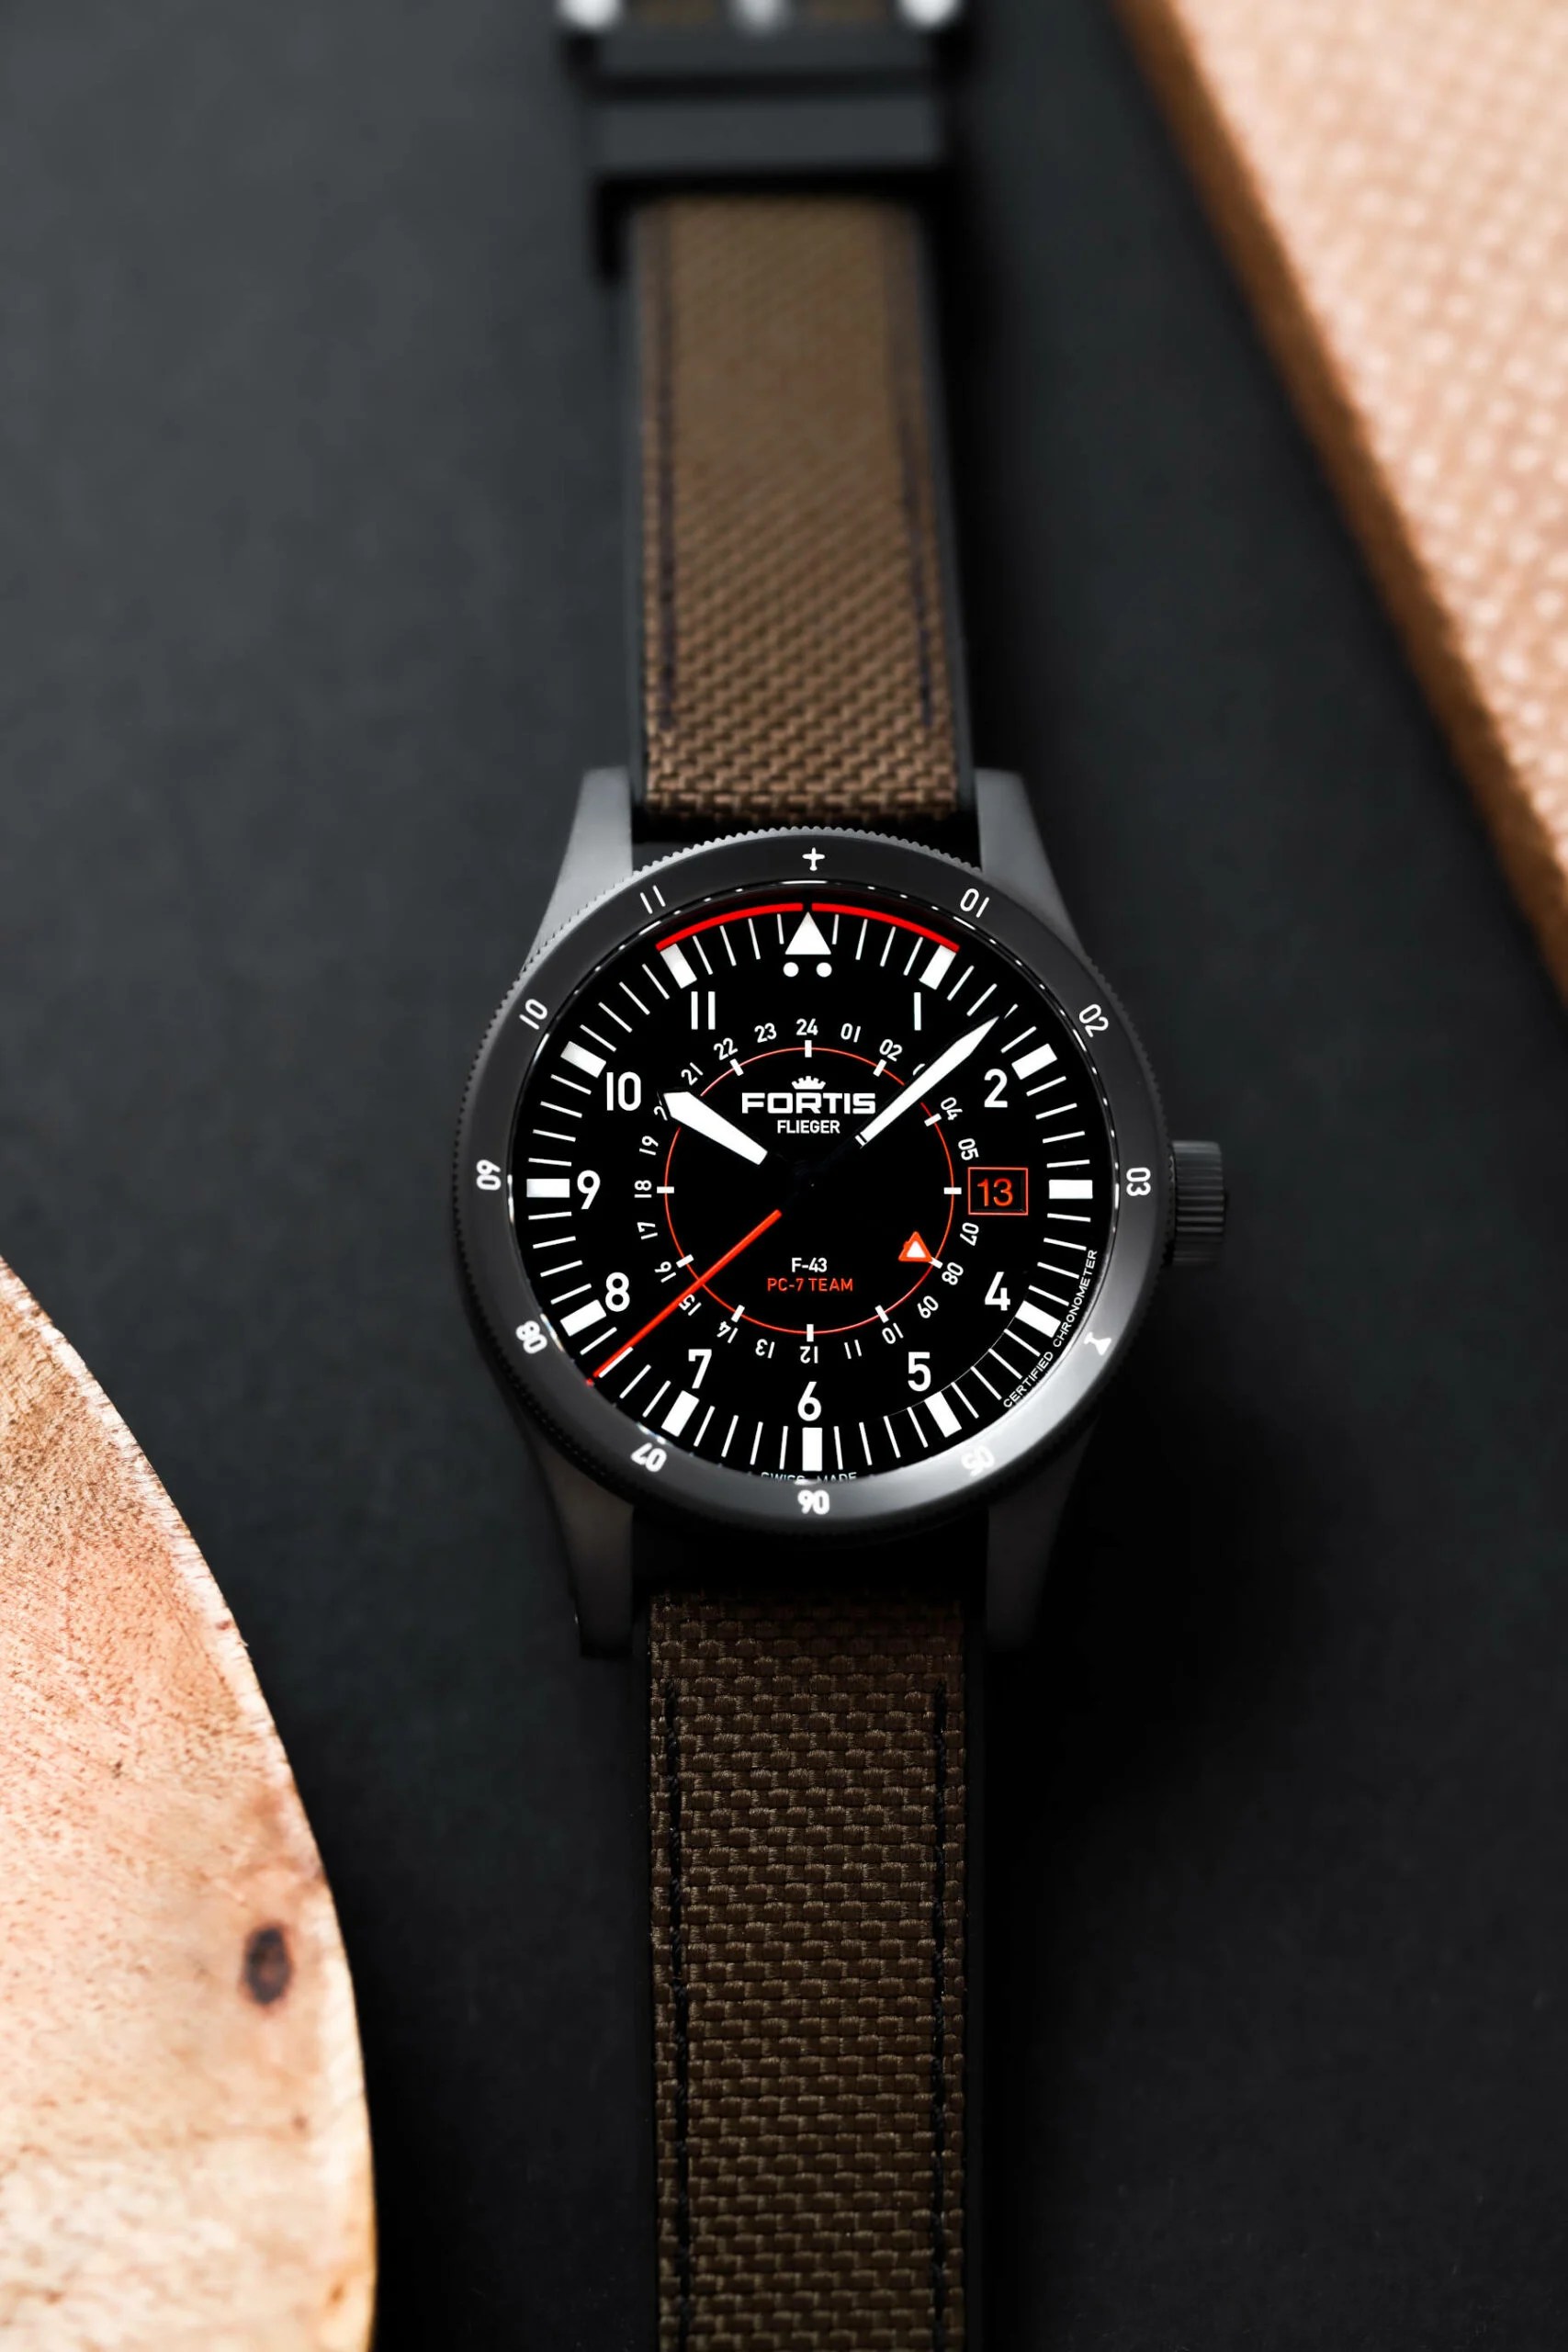 Fortis Flieger F-43 Triple-GMT PC-7 TEAM Limited Edition - 8